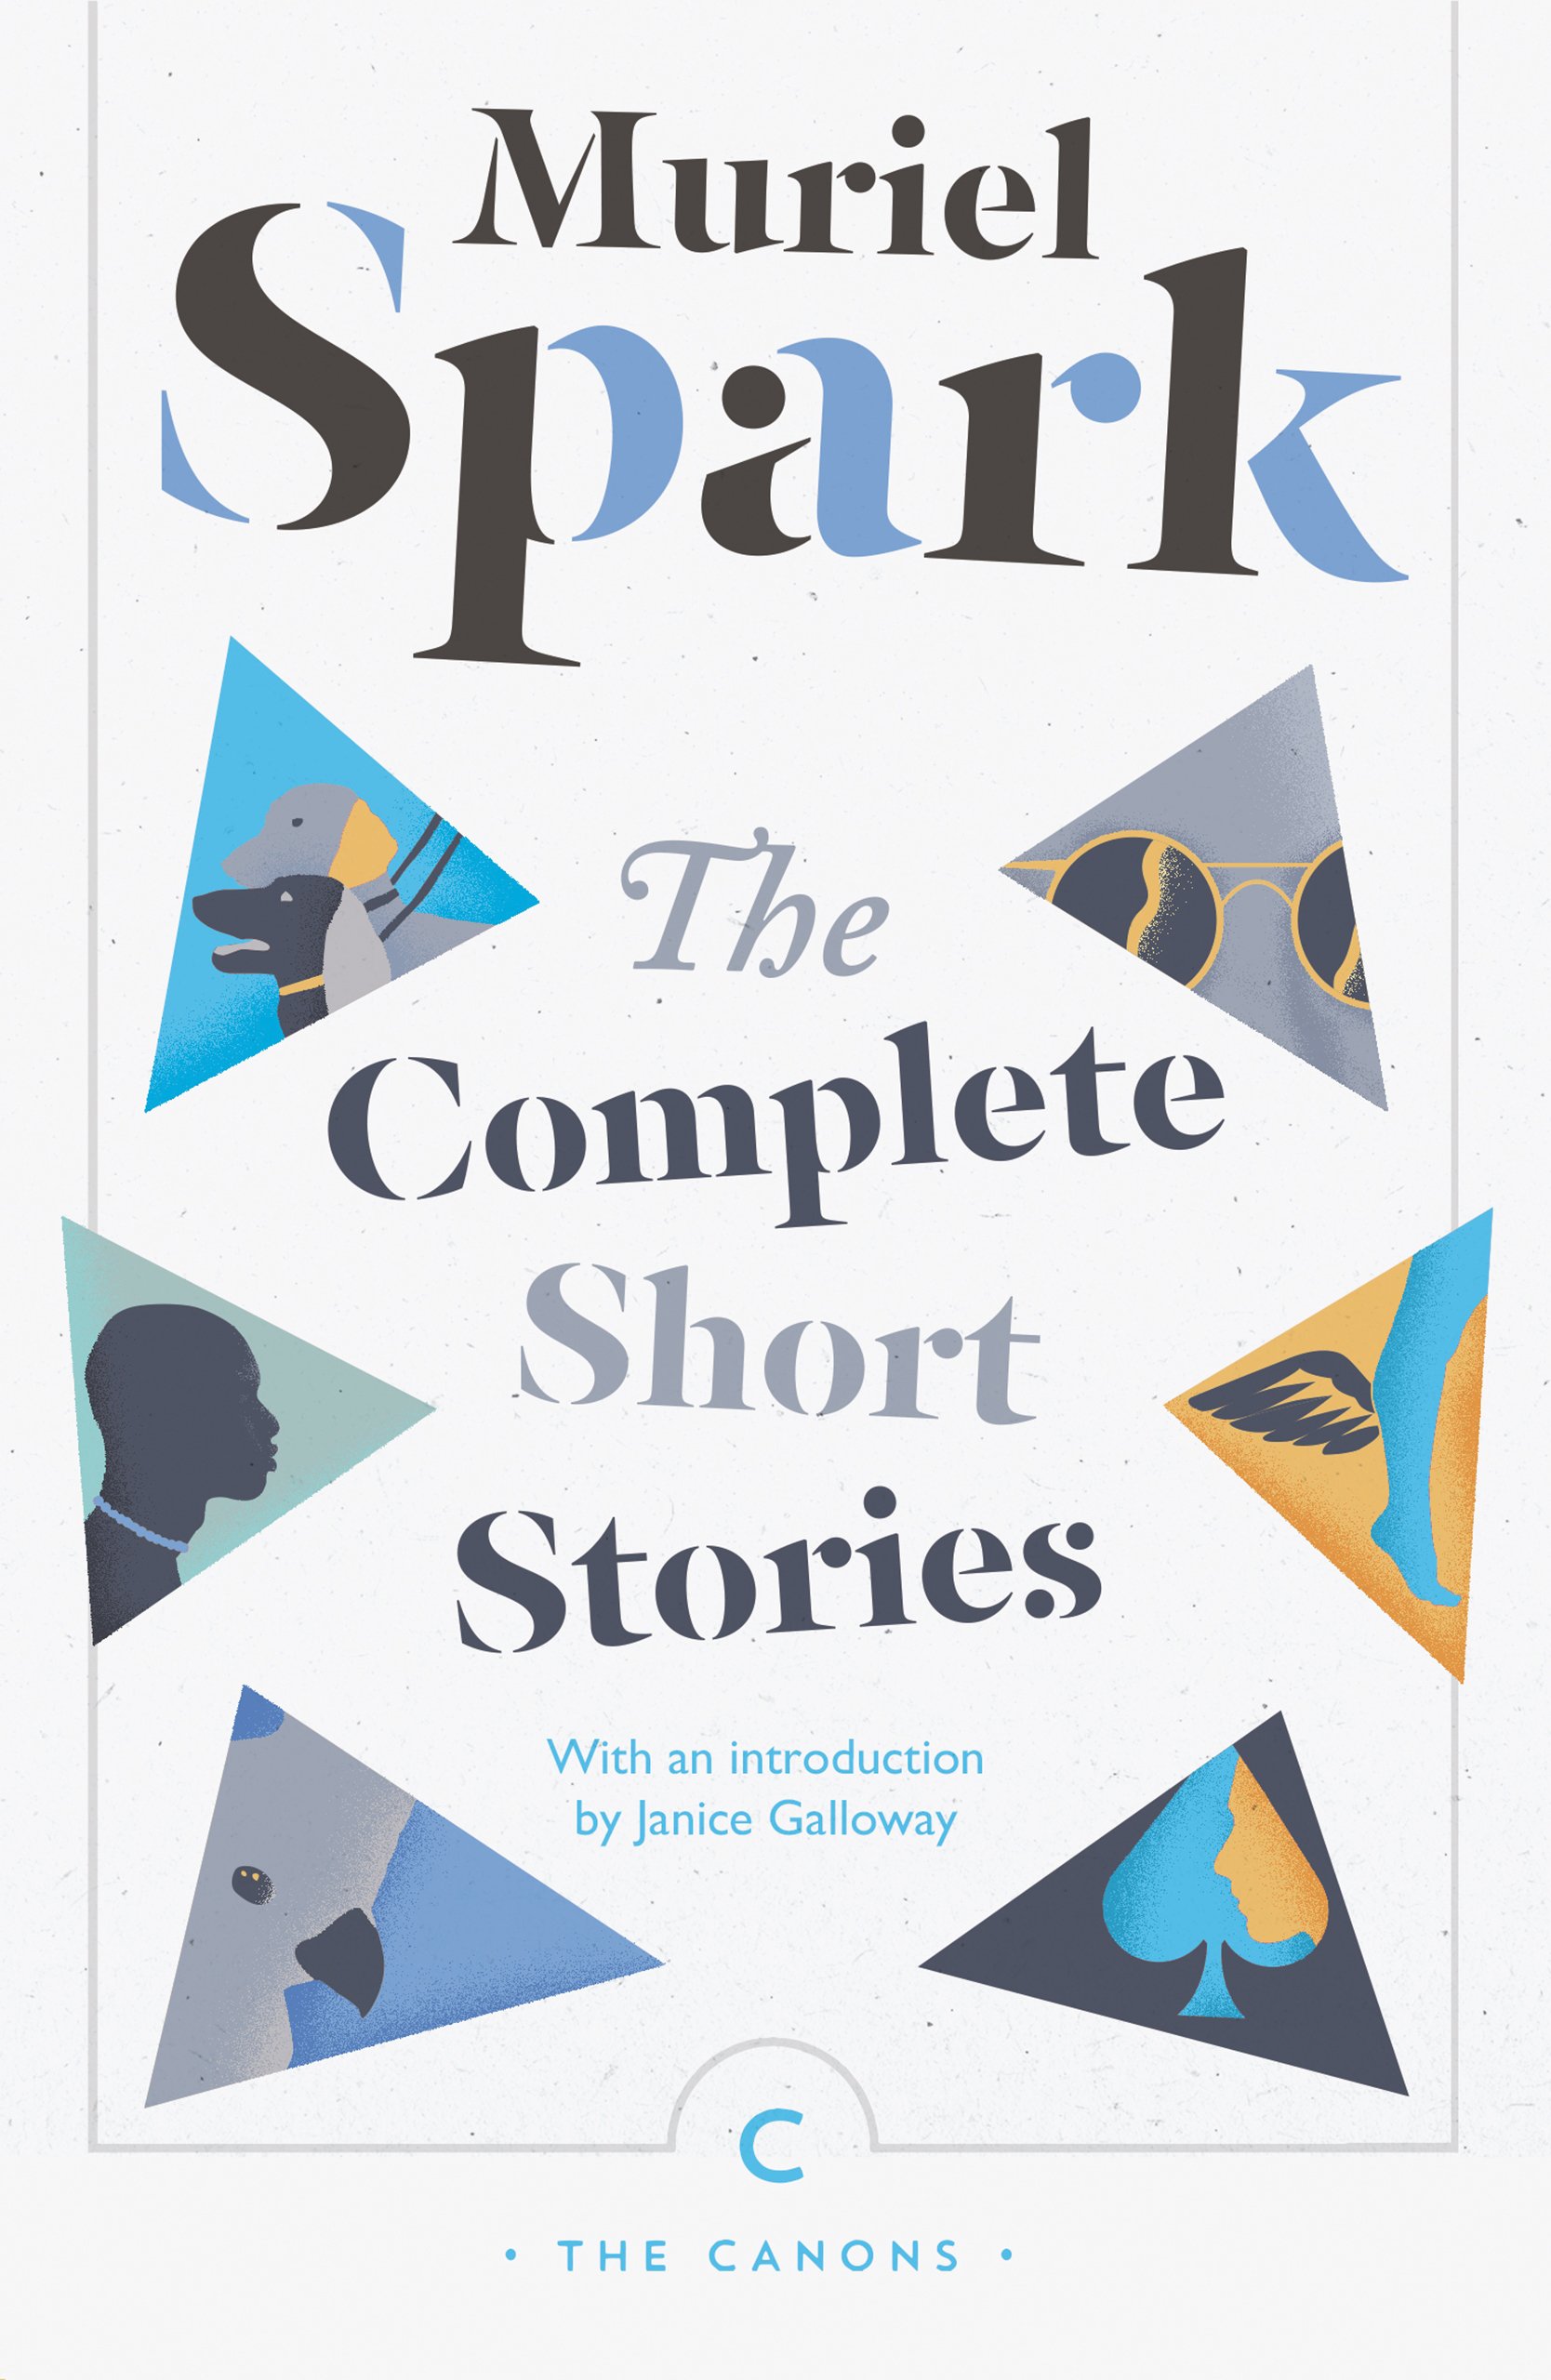 The Complete Short Stories | Muriel Spark